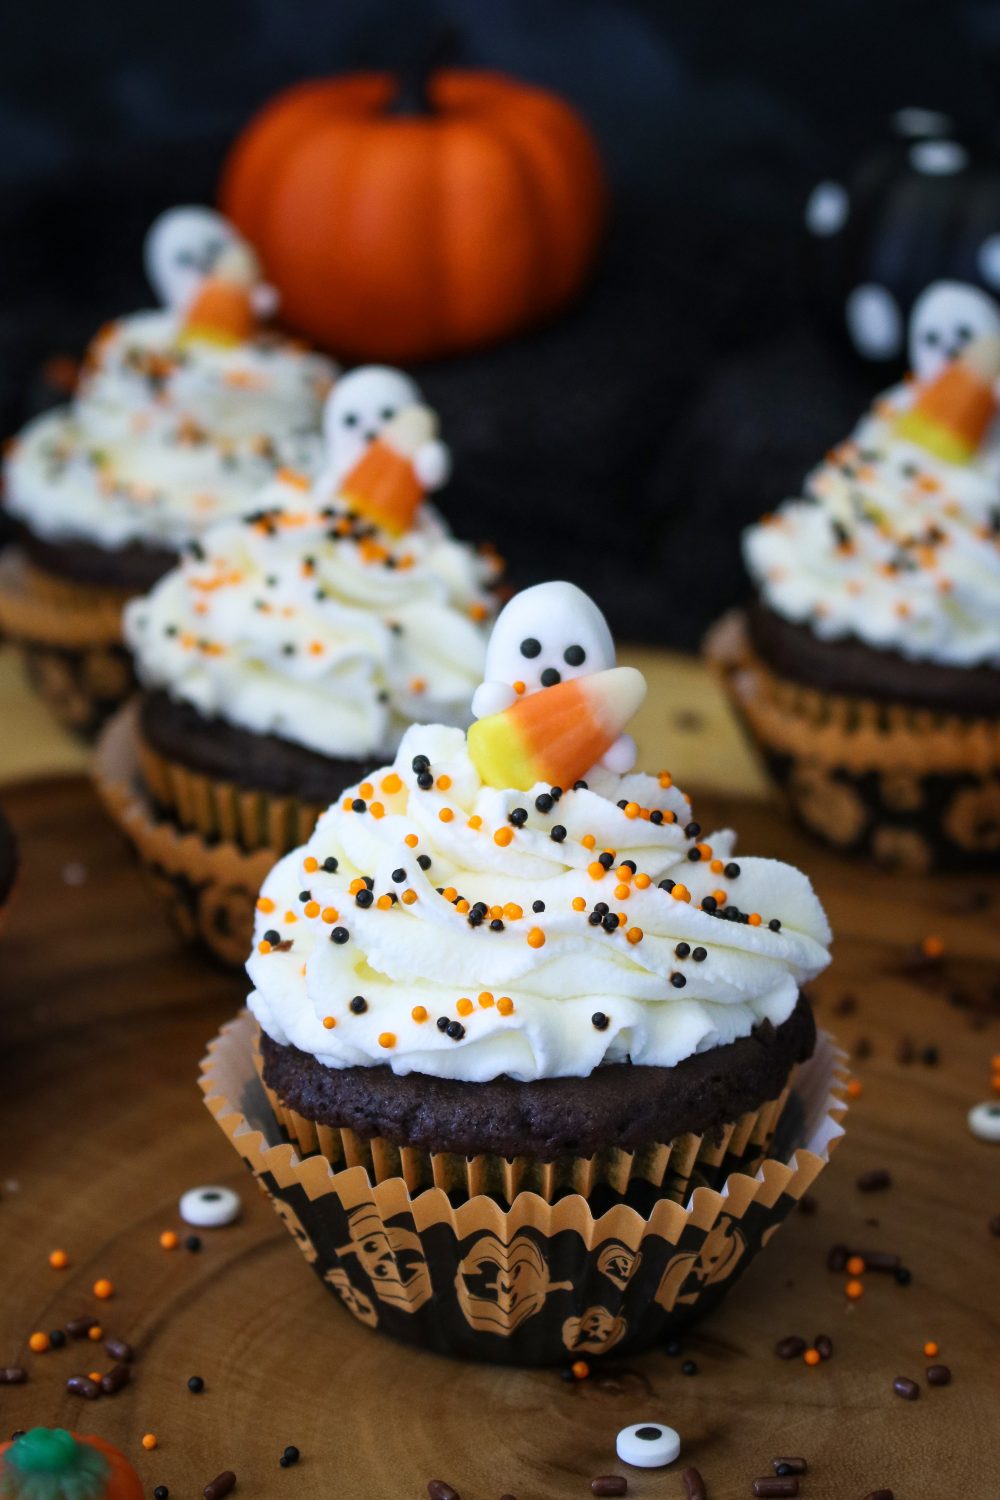 Eggless chocolate cupcakes with Halloween sprinkles